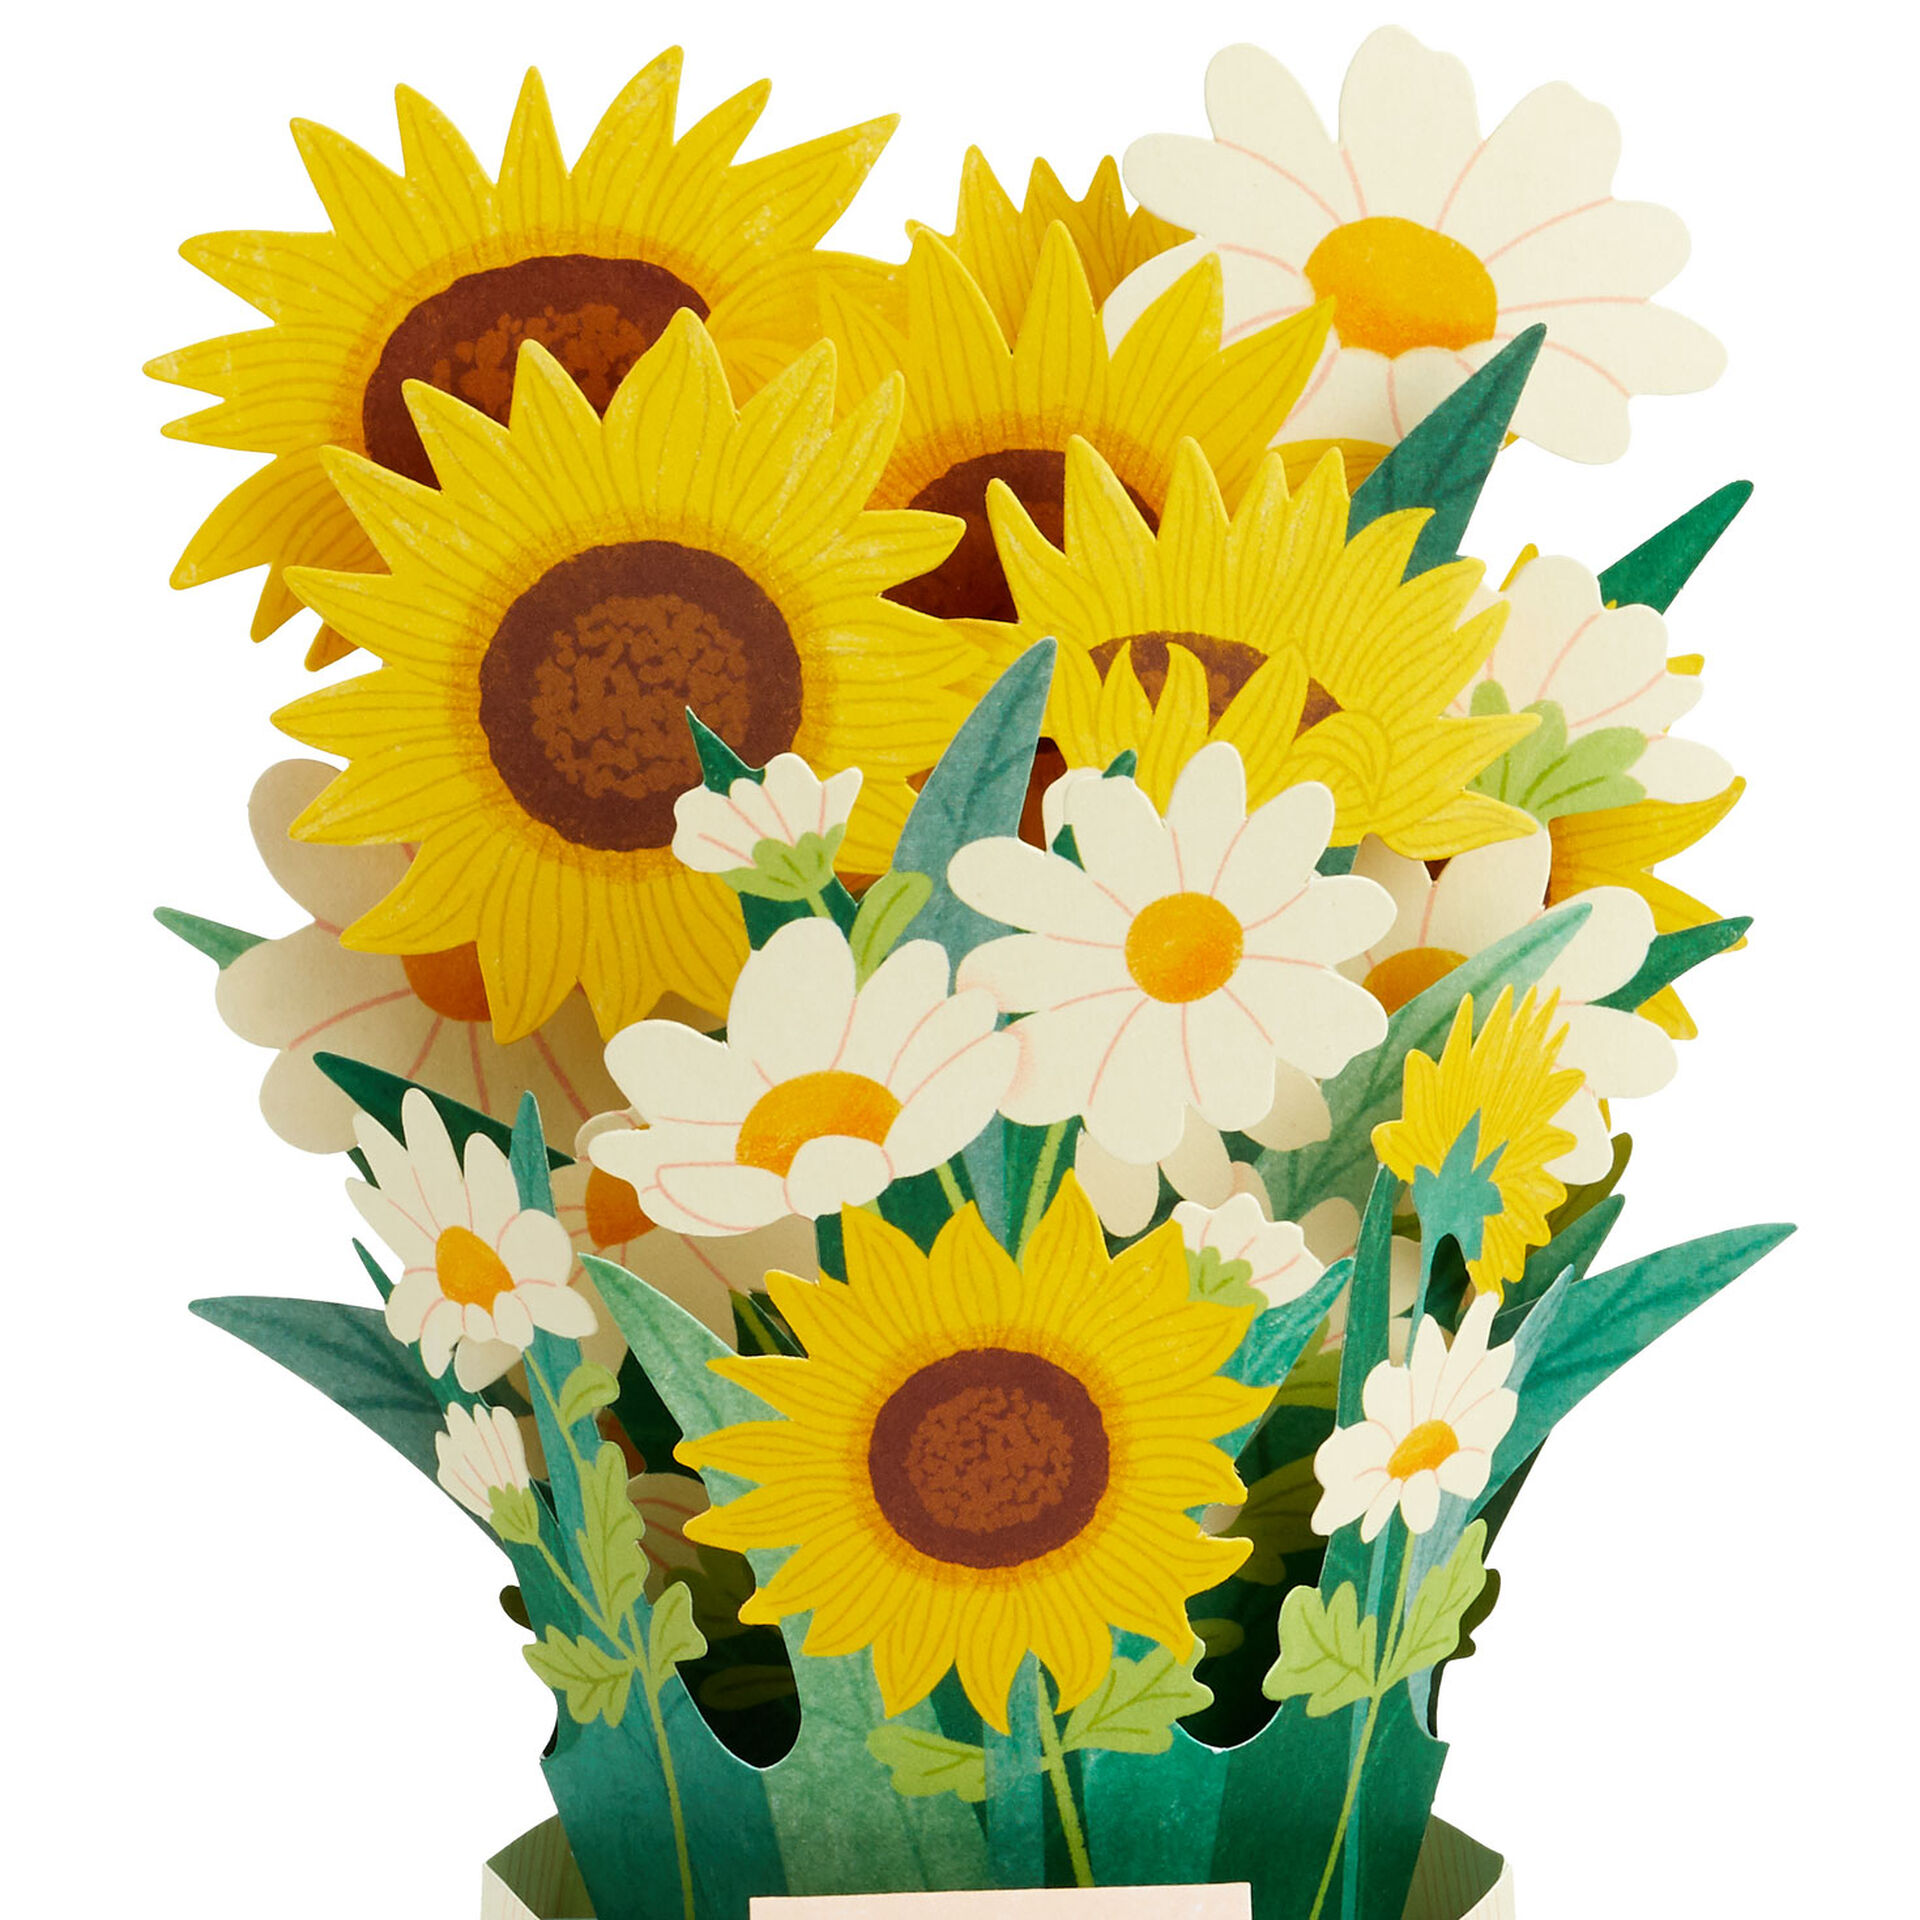 Daisy-&-Sunflower-Bouquet-Thinking-of-You-3D-PopUp-Card_799WDR1231_03